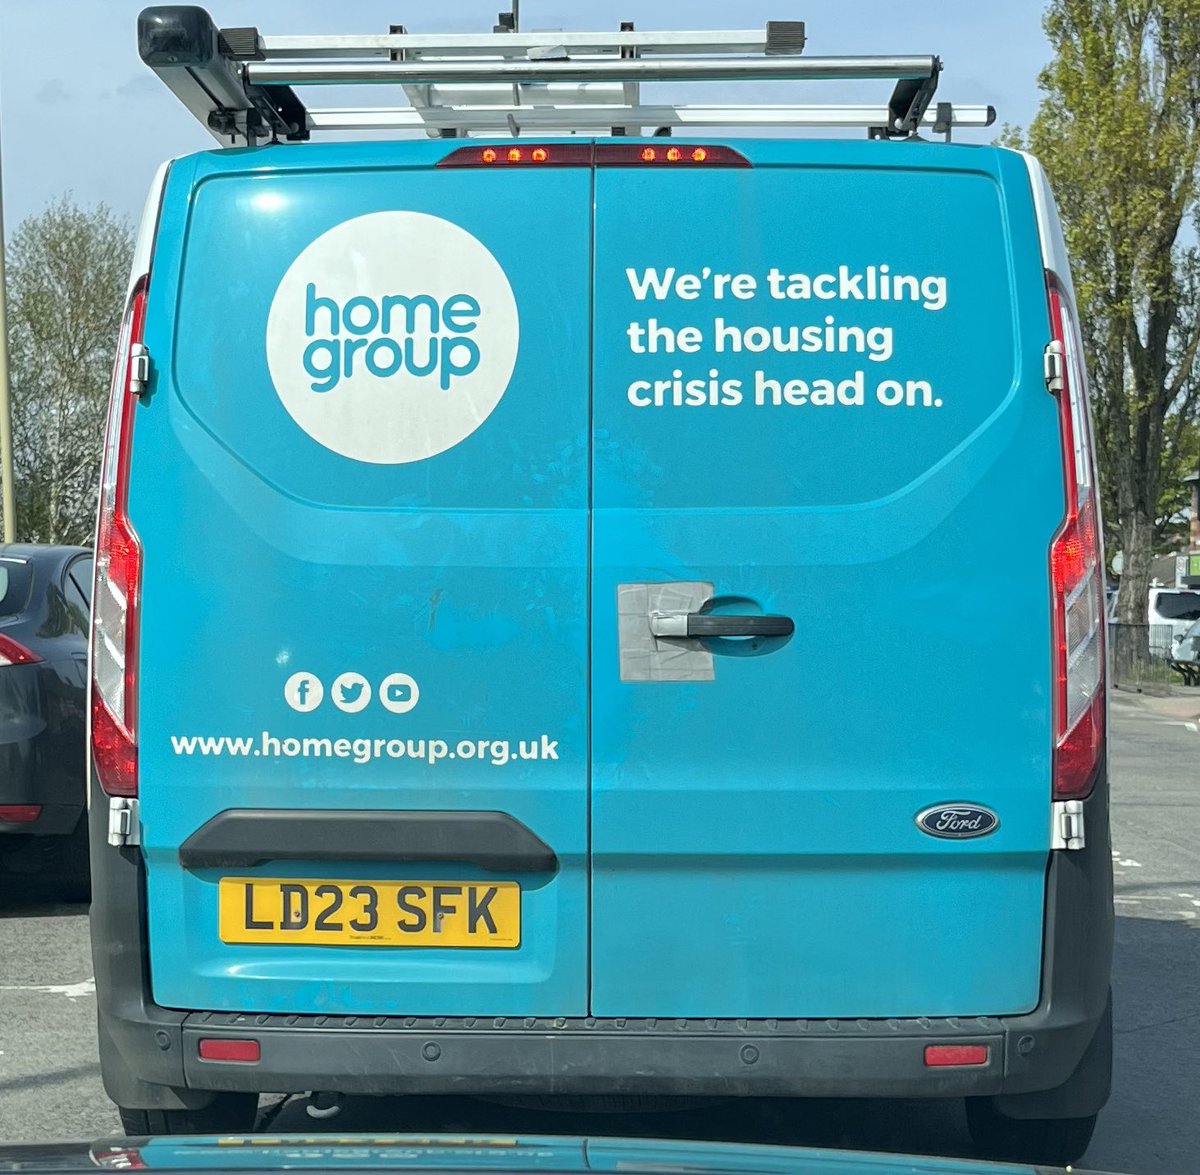 @homegroup kindly remind your employees whilst driving a company van not to throw fag butts out the window please👍🏻